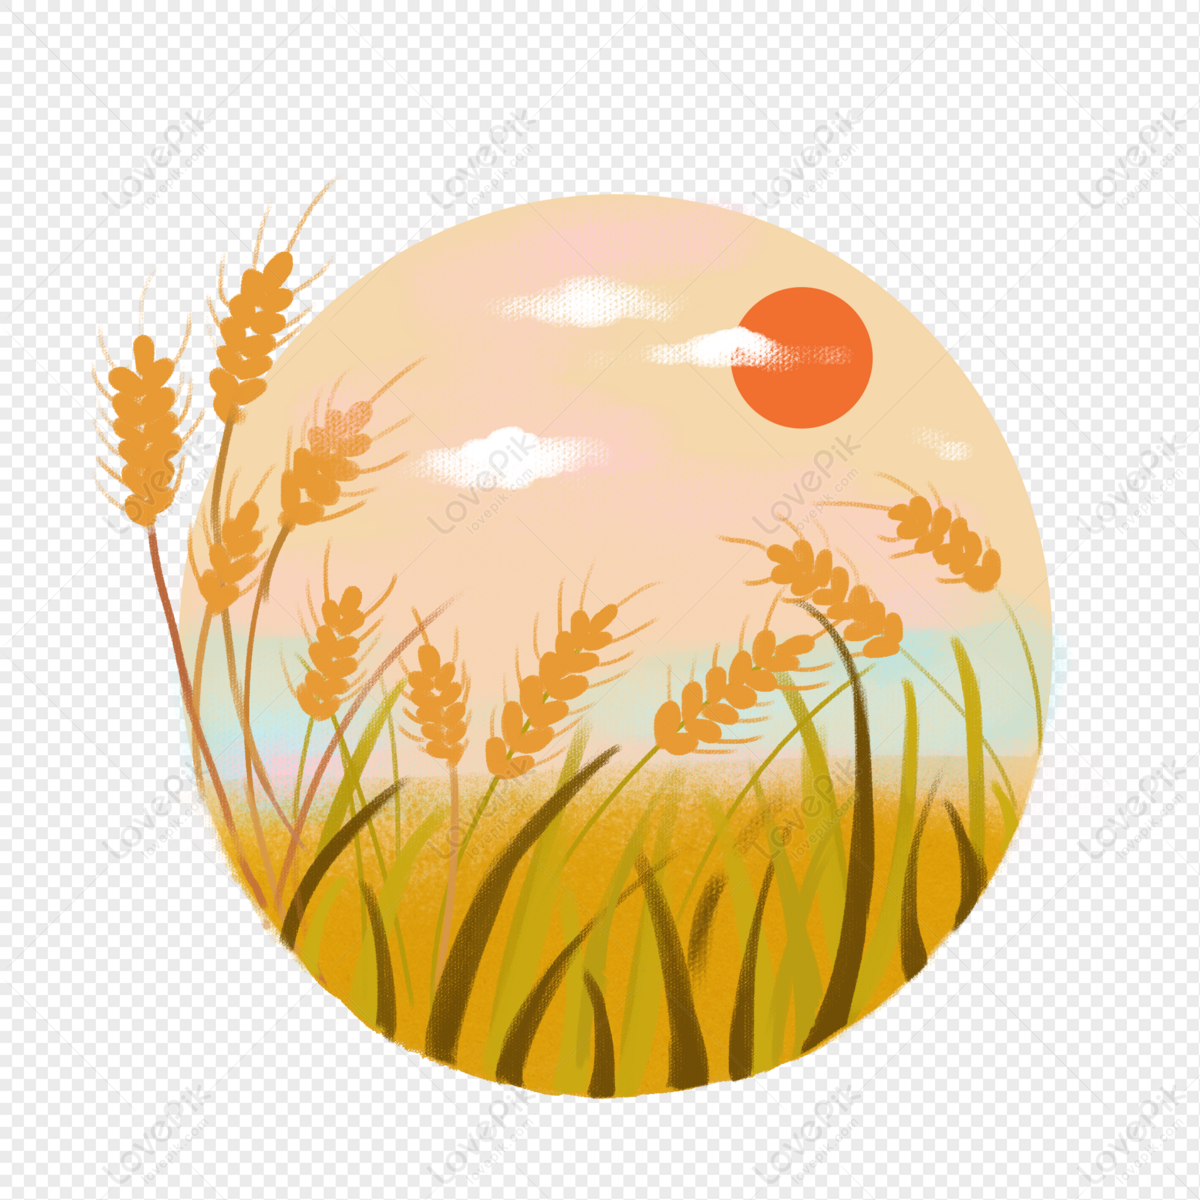 field of wheat clipart photo